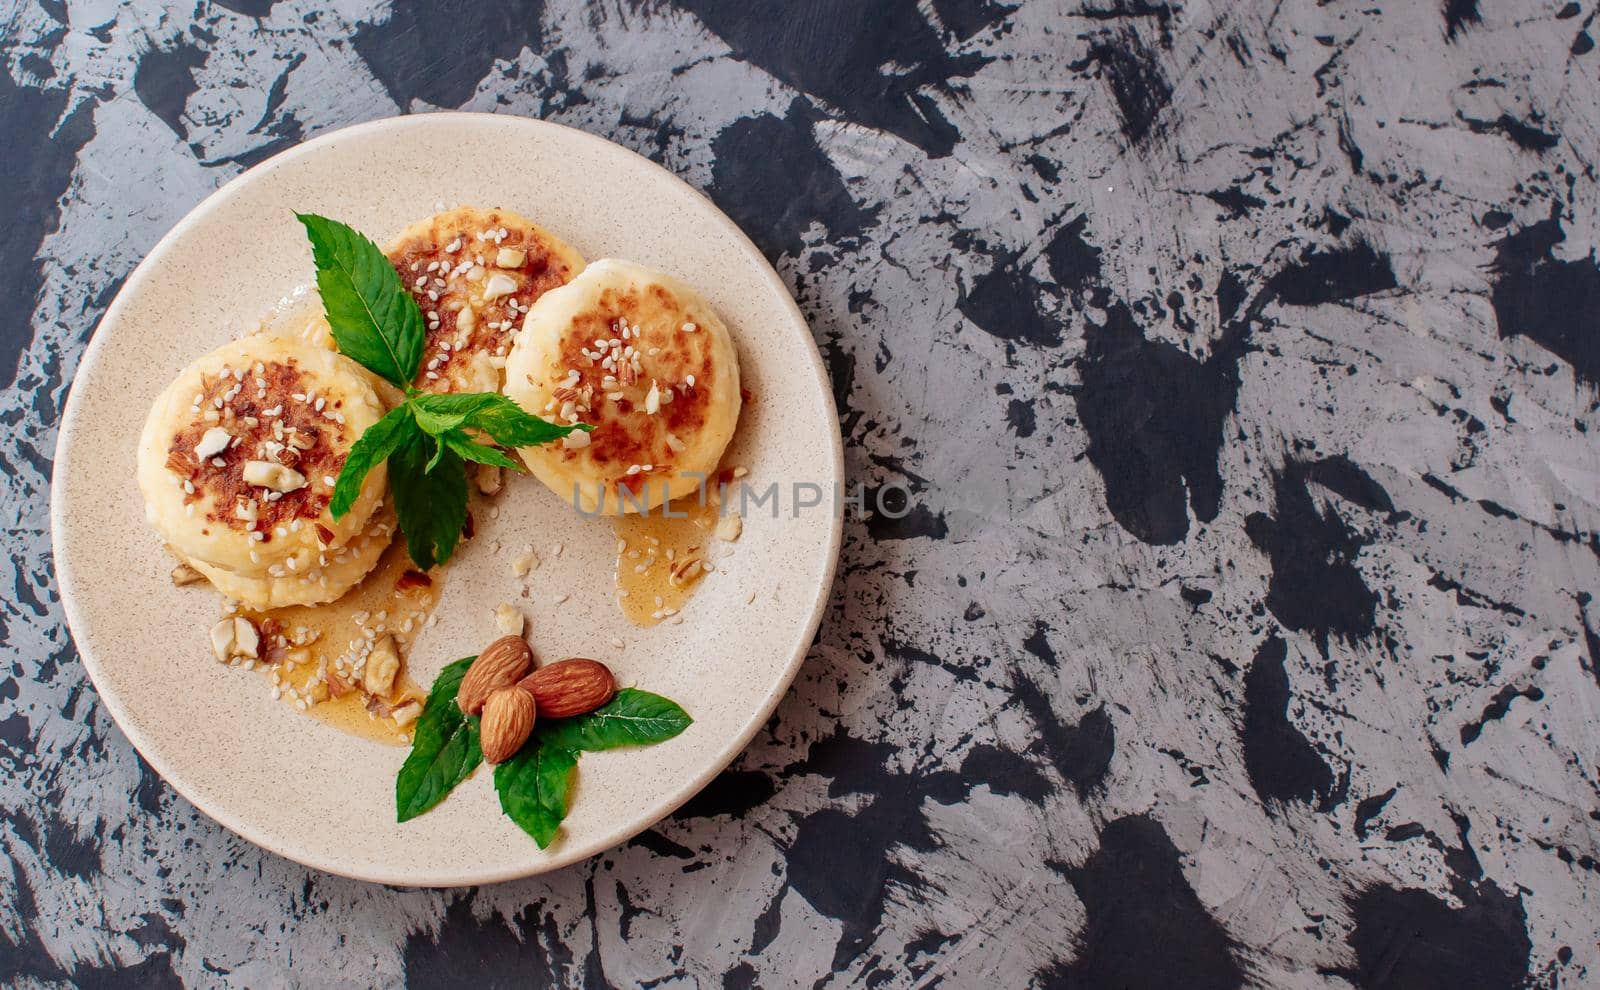 Cheesecakes,cottage cheese pancakes with almonds,fresh mint and maple syrup on a gray background from a concrete table copy space. Cheesecakes, homemade traditional Ukrainian and Russian cheesecakes